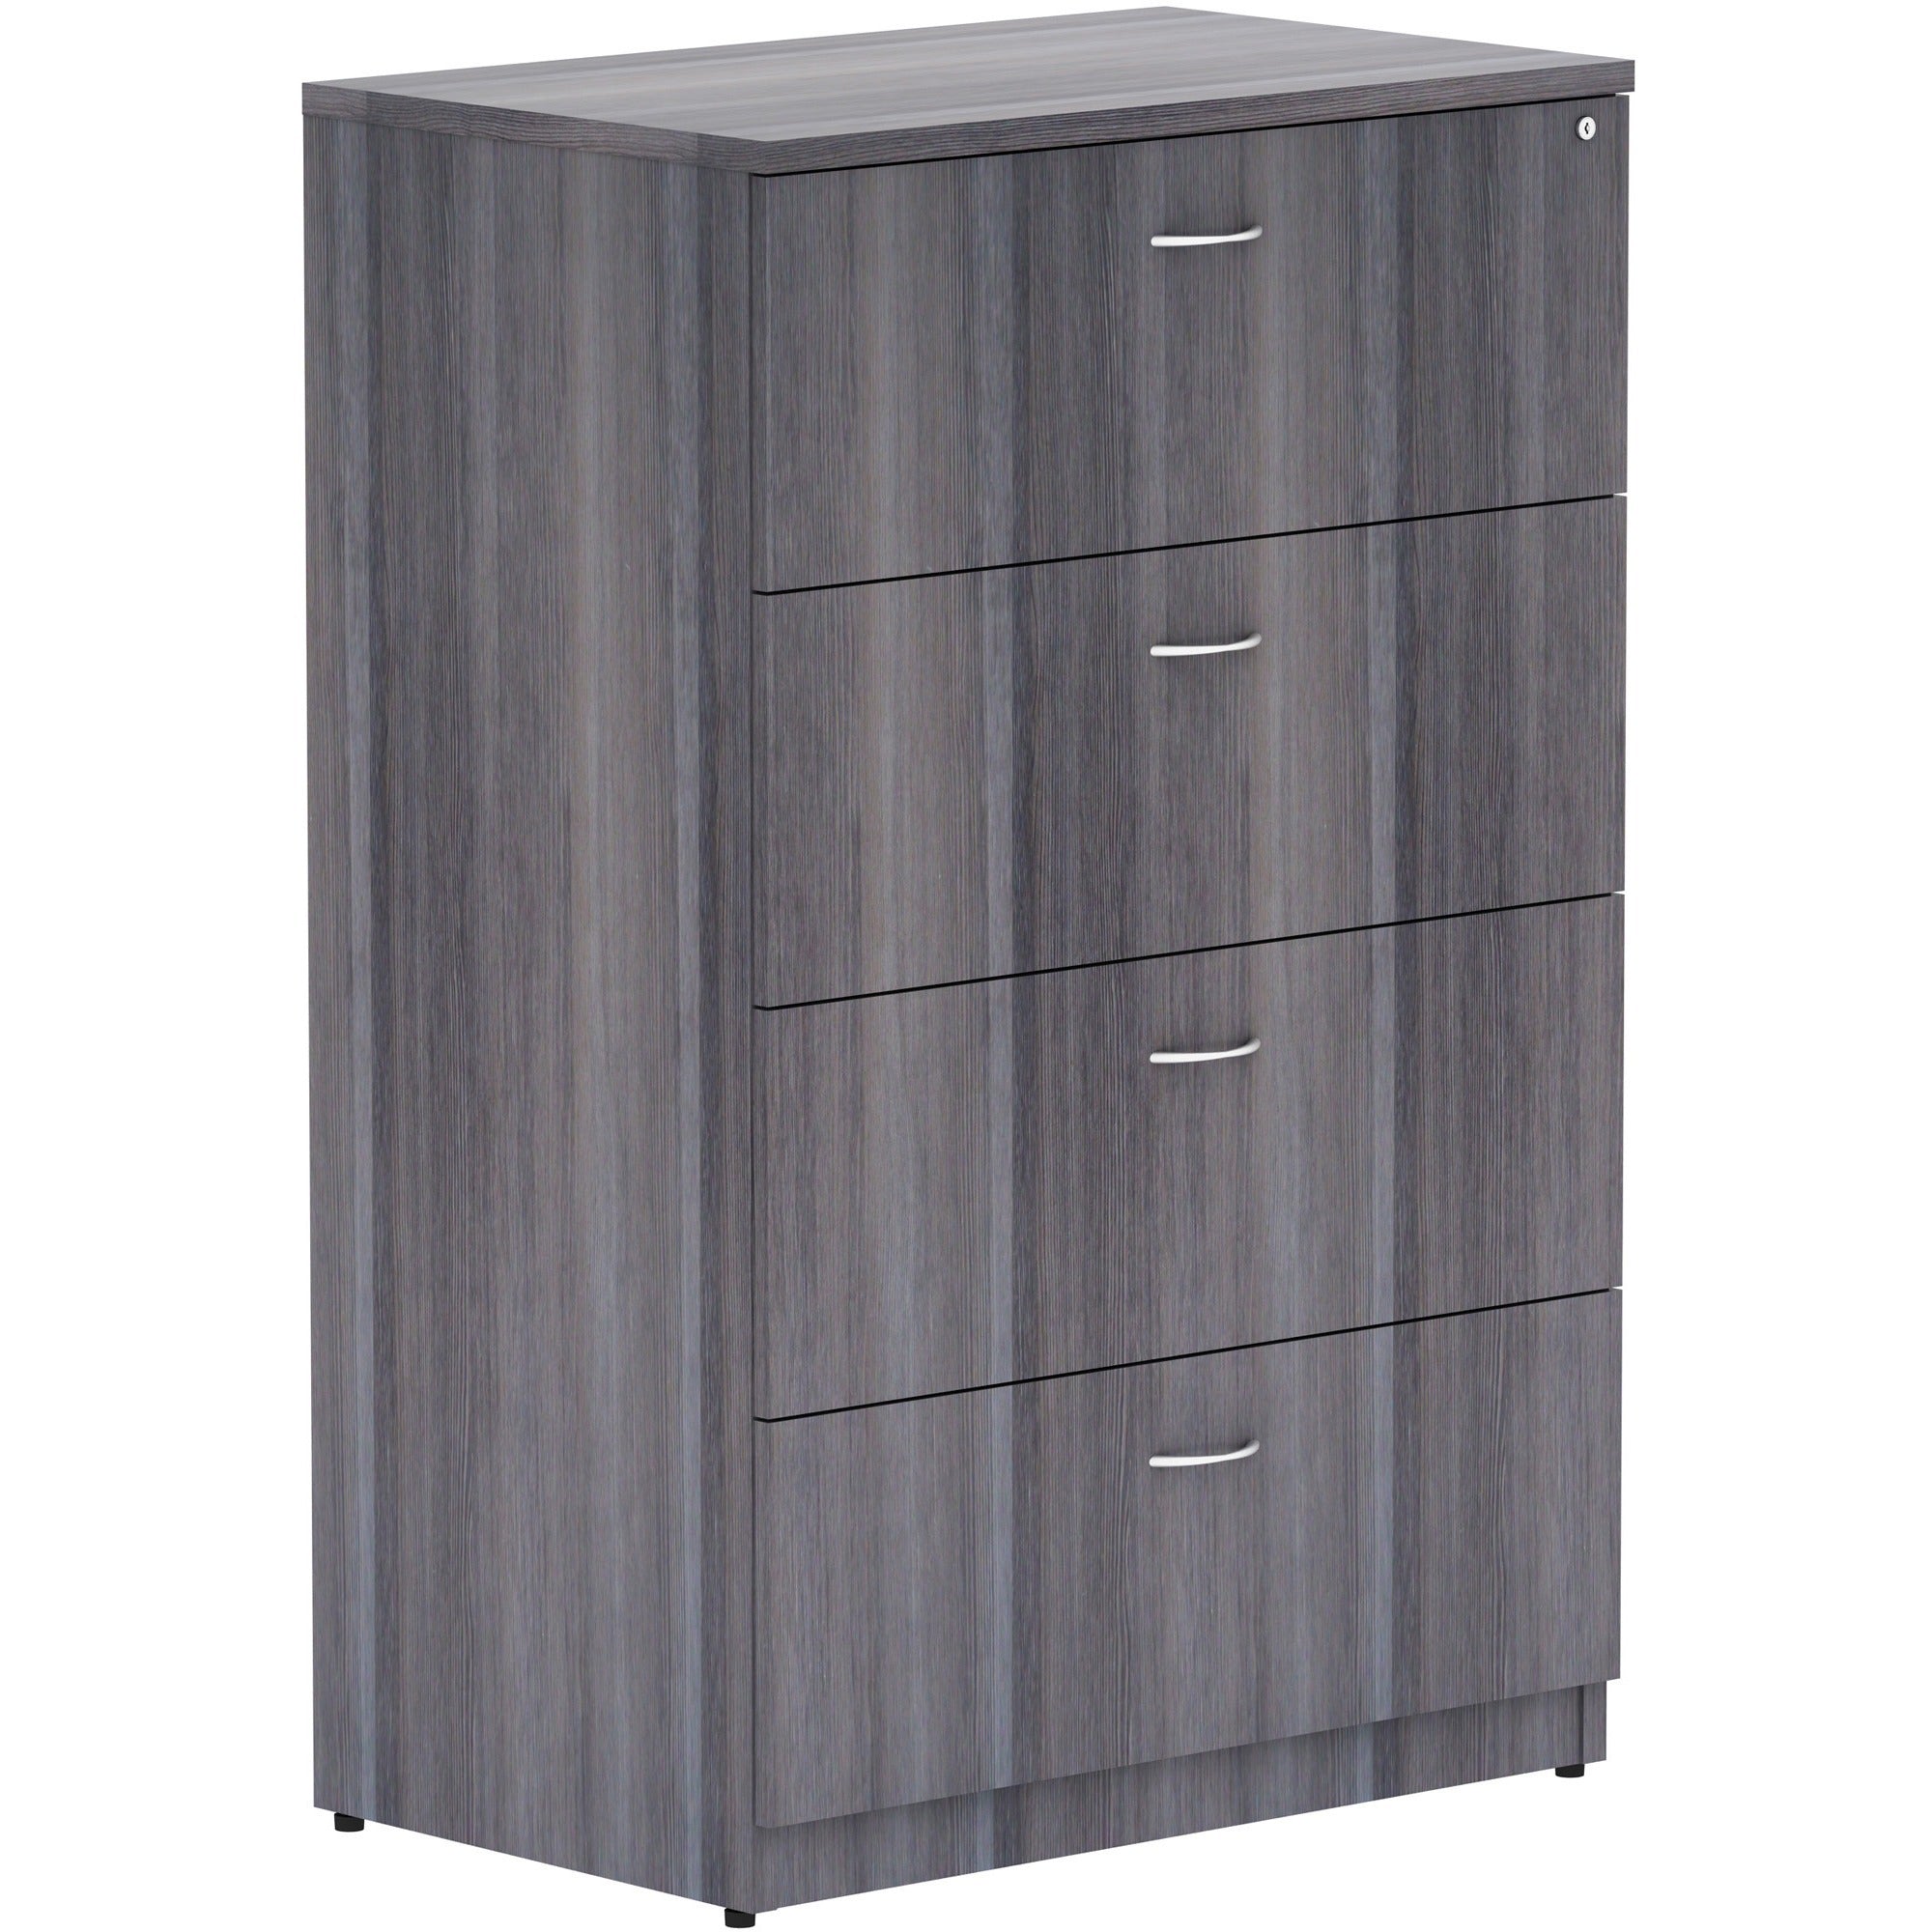 lorell-essentials-series-4-drawer-lateral-file-355-x-22548-lateral-file-1-top-4-x-file-drawers-finish-weathered-charcoal-laminate_llr69624 - 1